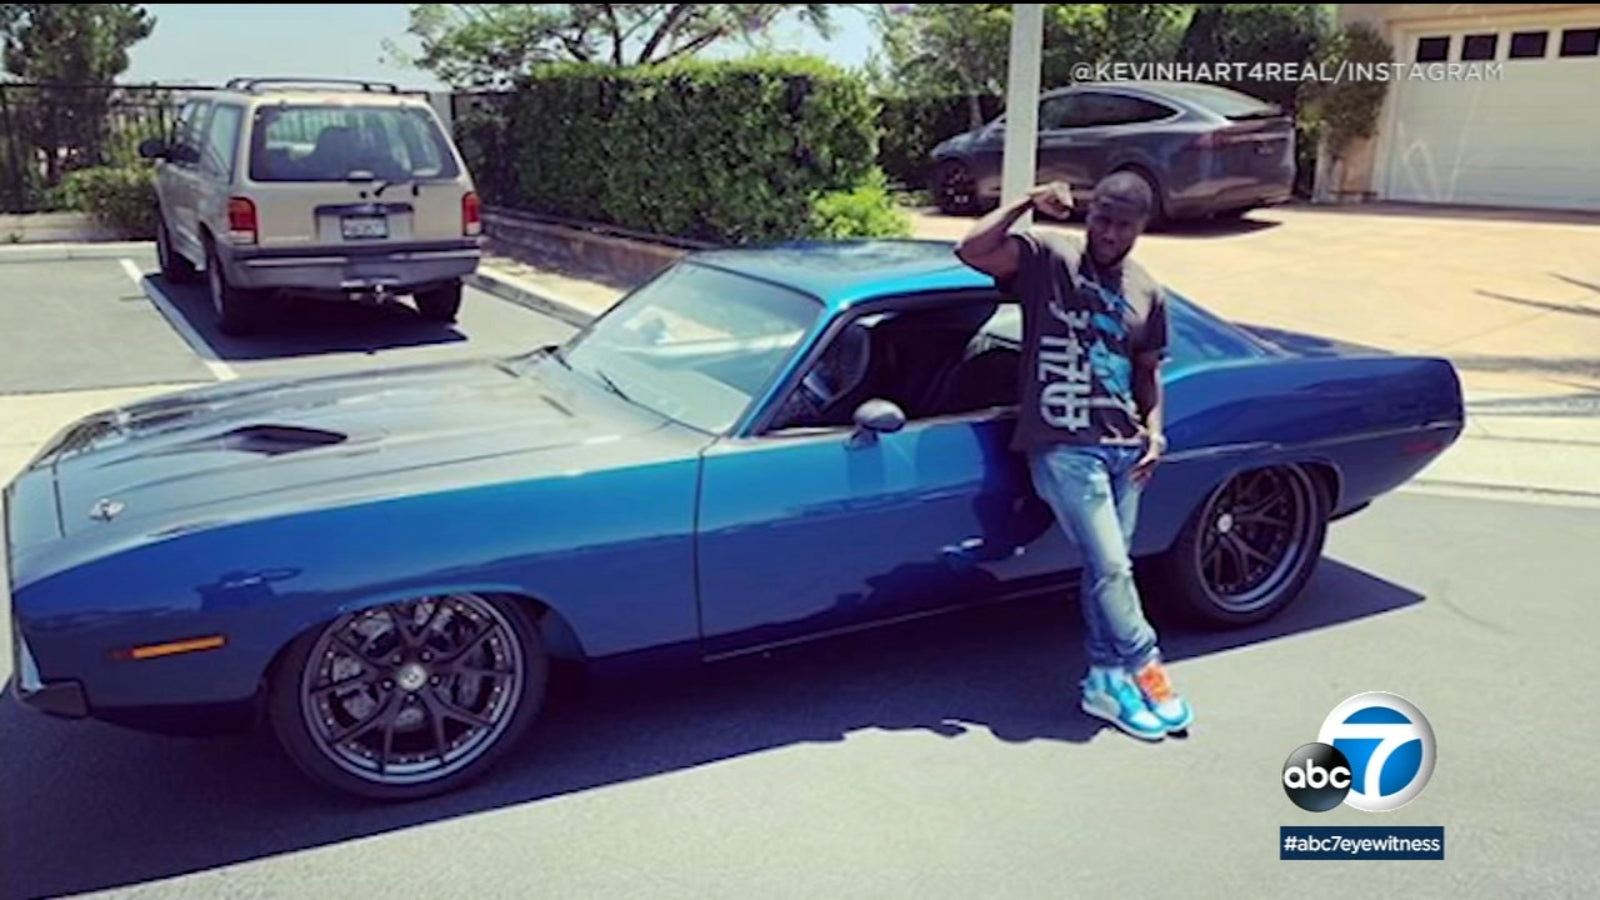 KEVIN HART INJURED IN SERIOUS CAR ACCIDENT IN L.A. [VIDEO]